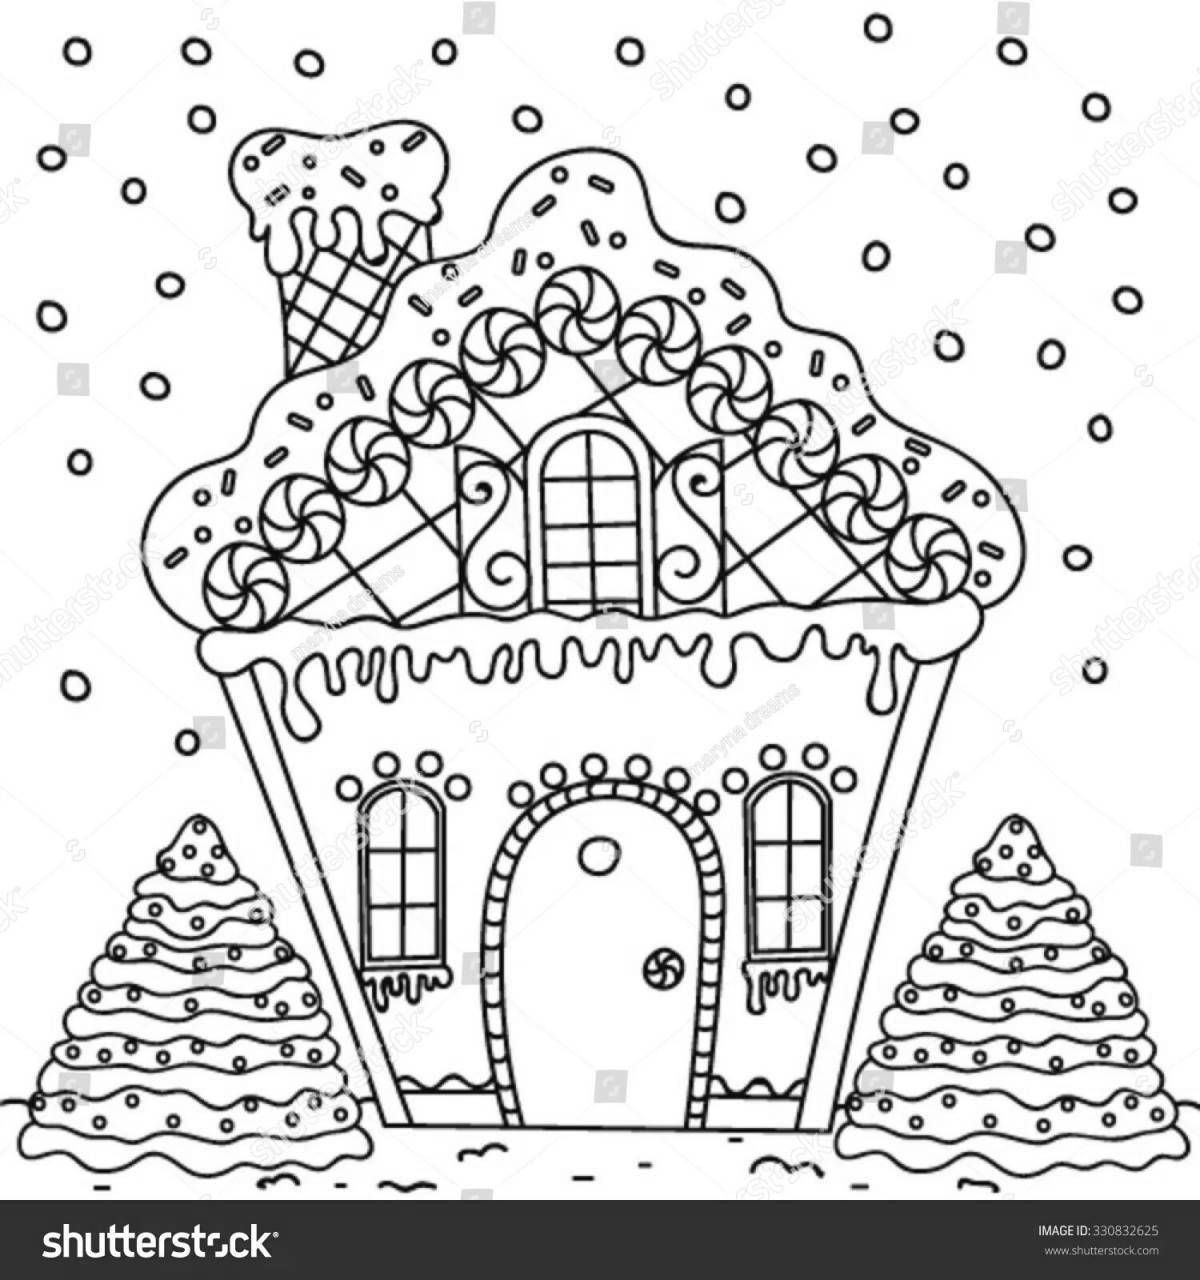 Decorated Christmas gingerbread house coloring book